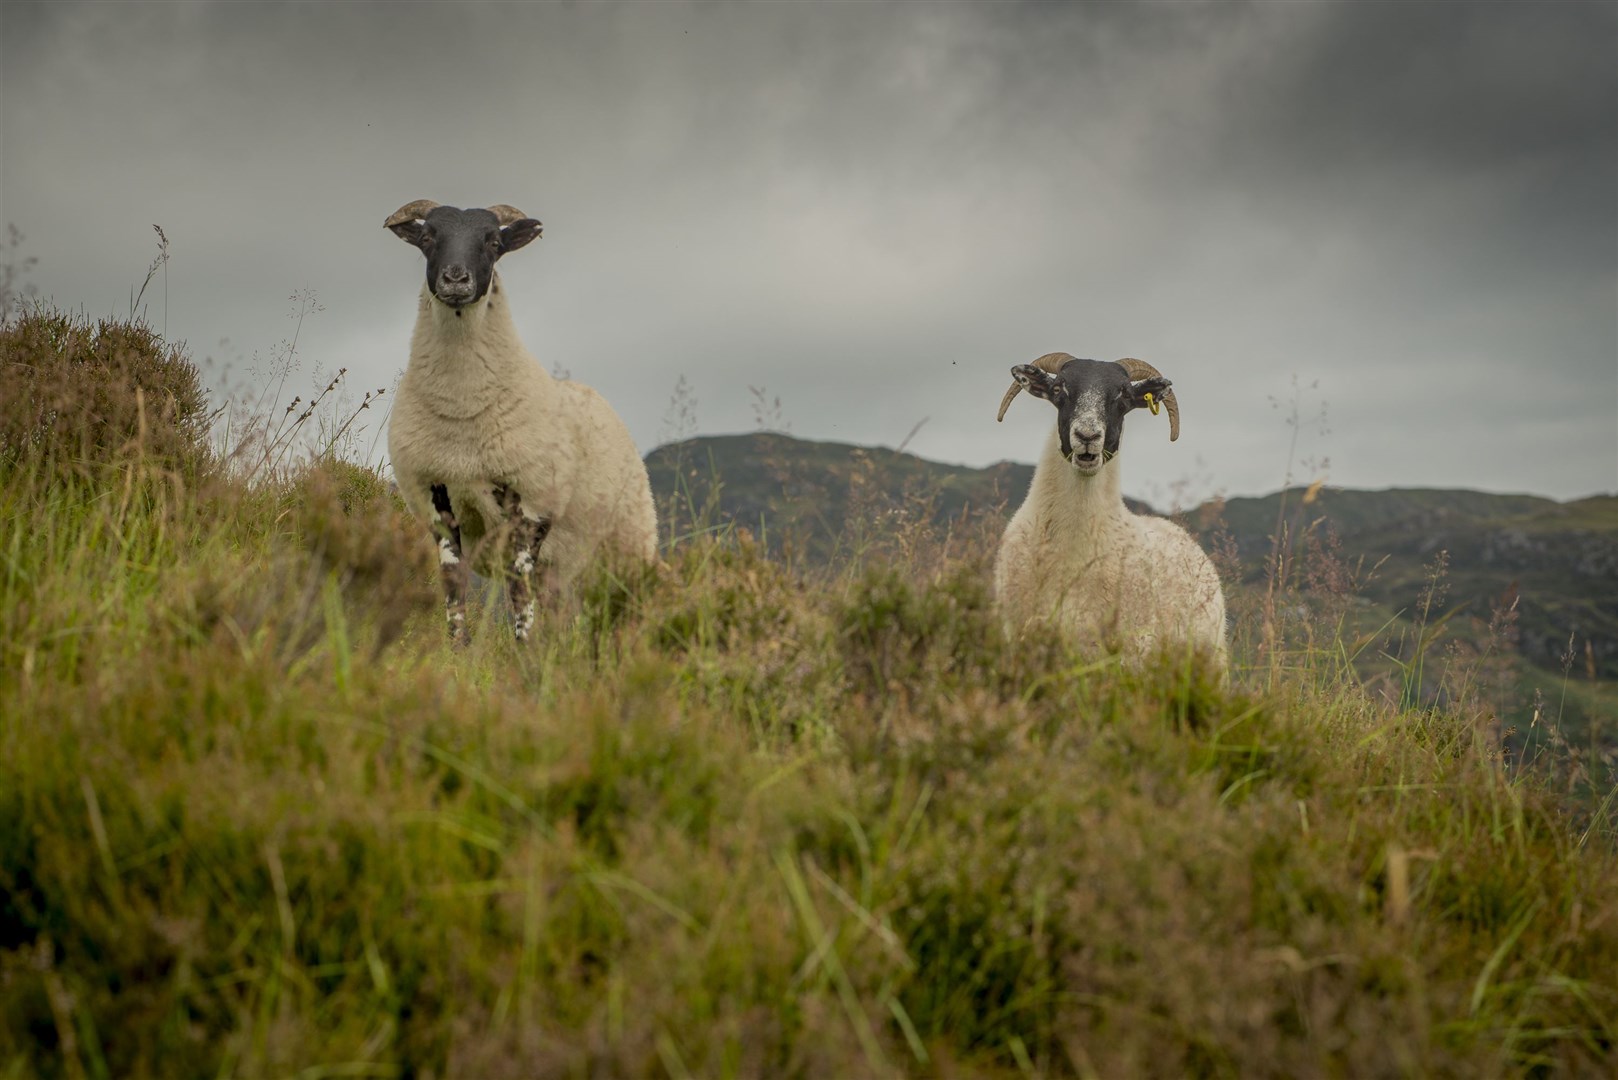 Sheep and other herbivores play a crucial role in reducing wildfire risk. Picture: Ian R Fleming/NFUS.